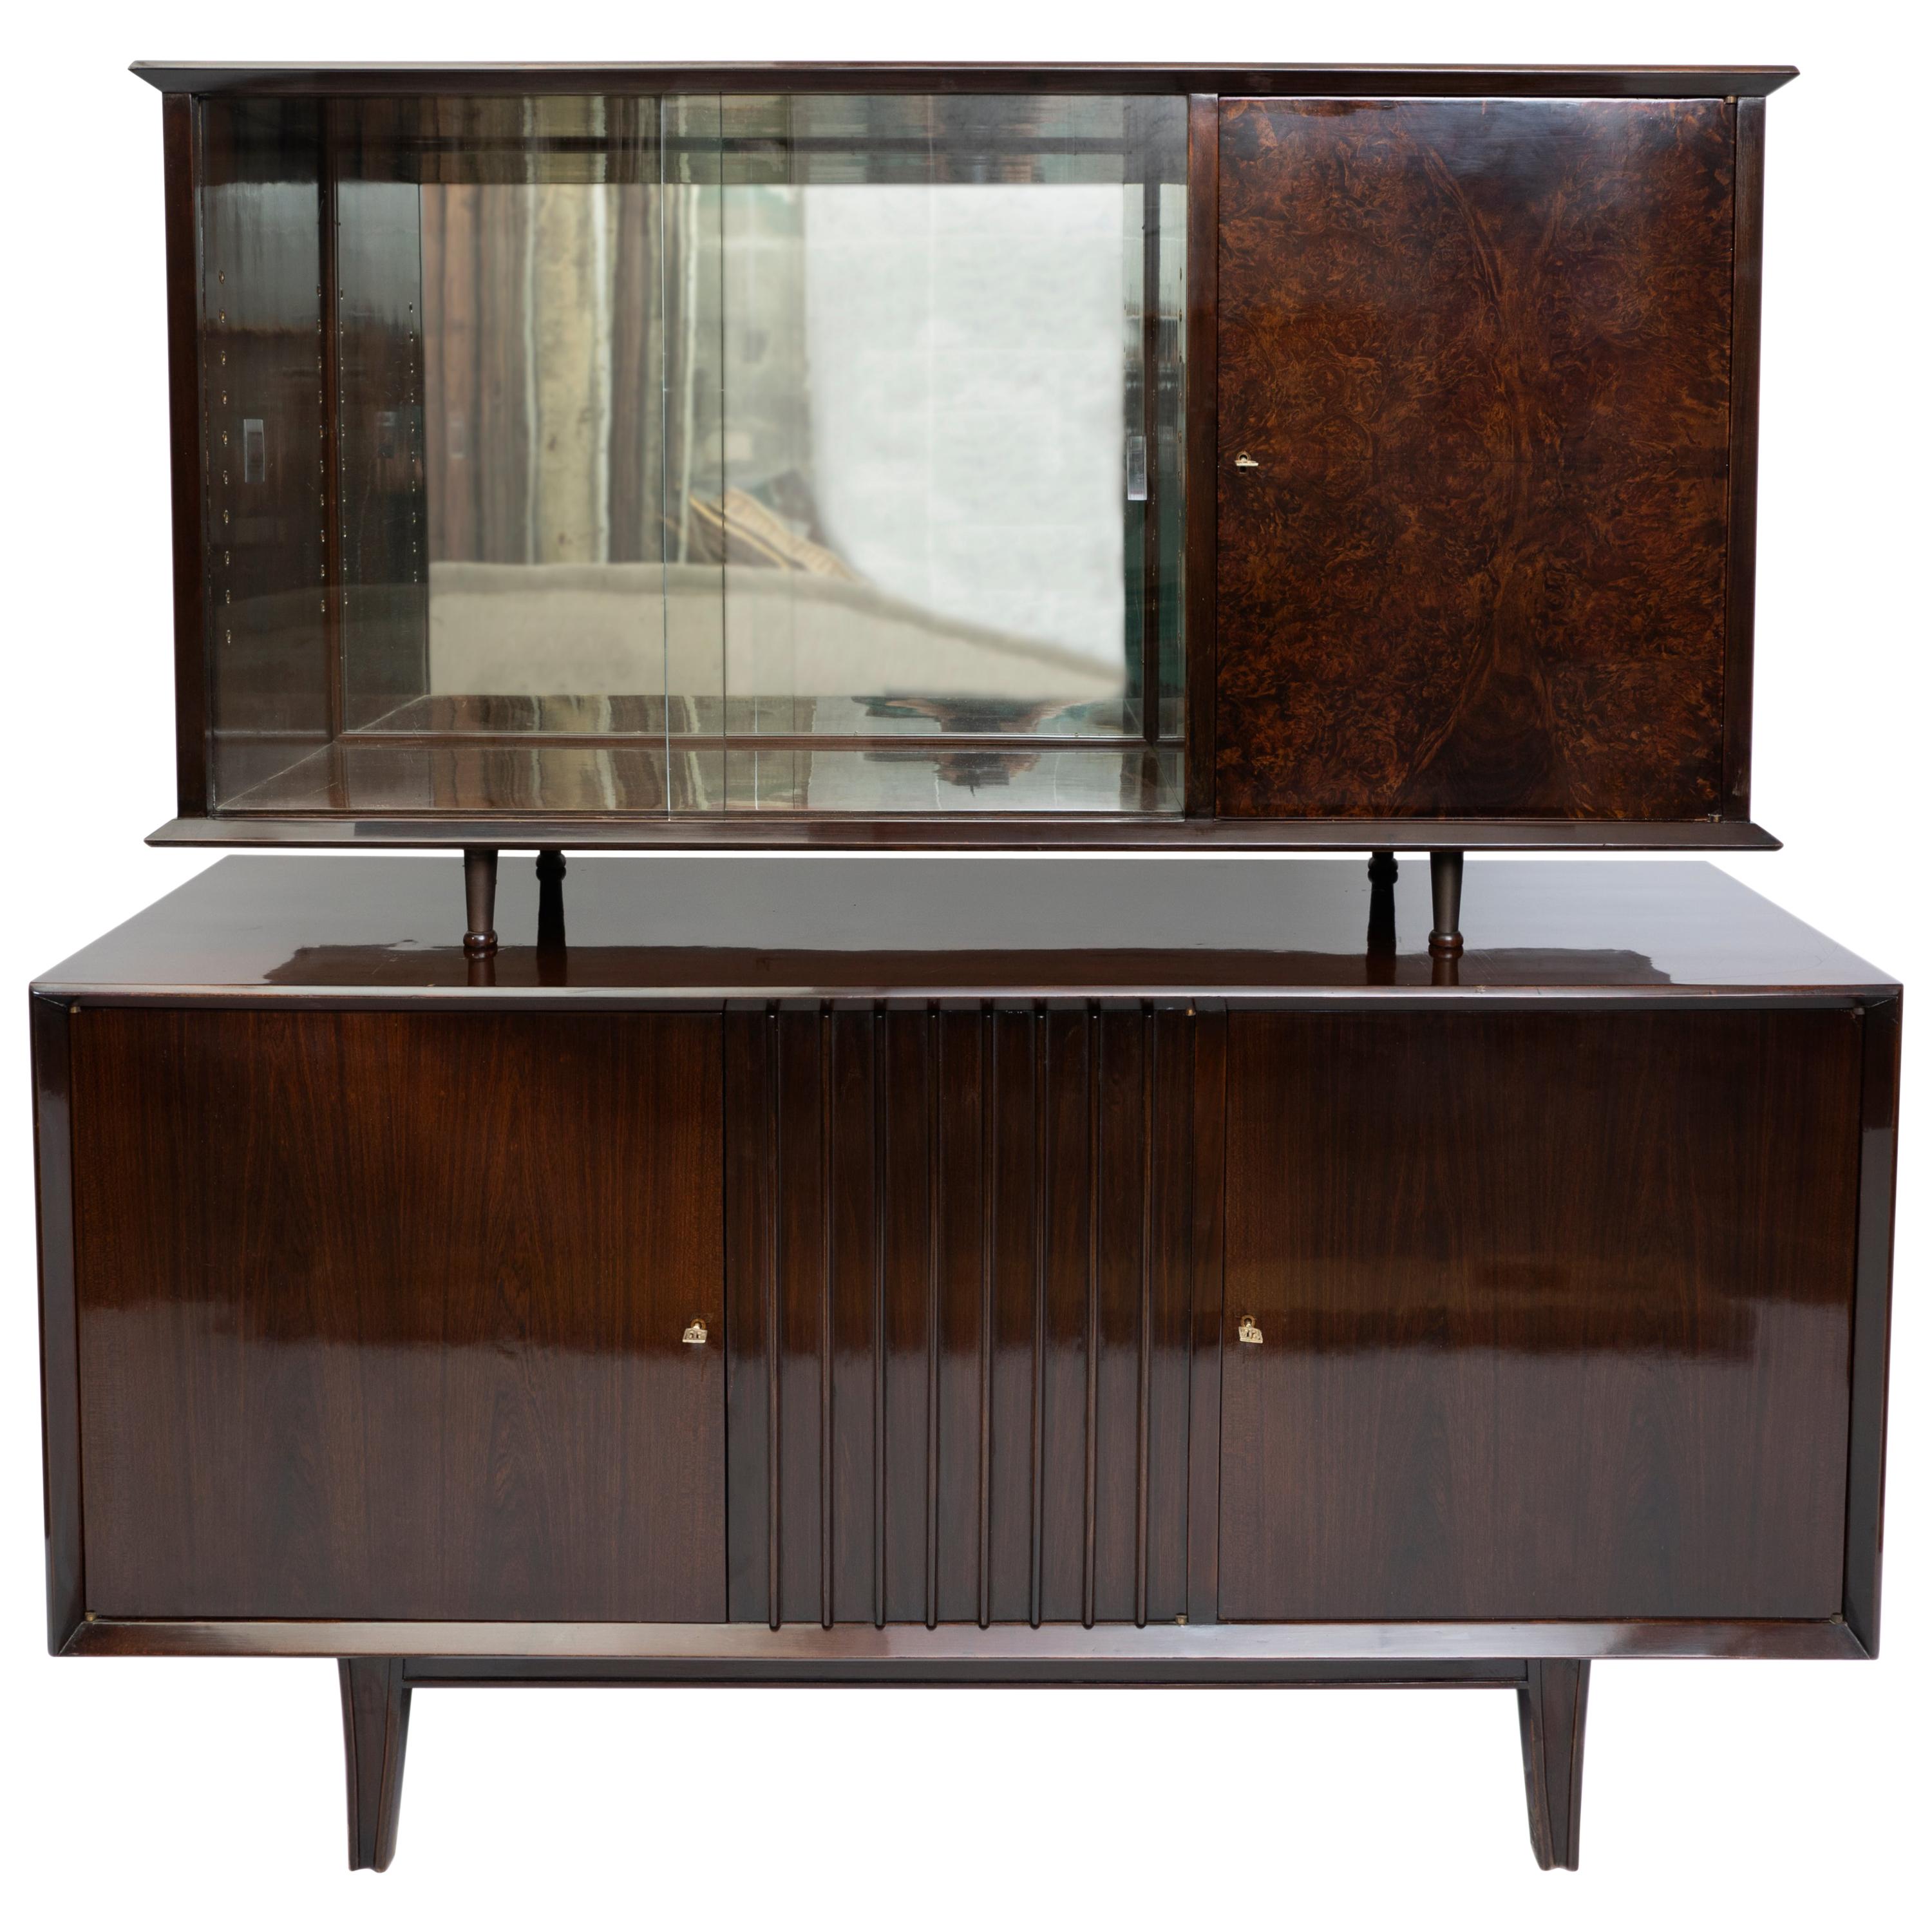 Wood, Glass and Bronze Cabinet and Vitrine by Englander & Bonta, Argentina, 1950 For Sale